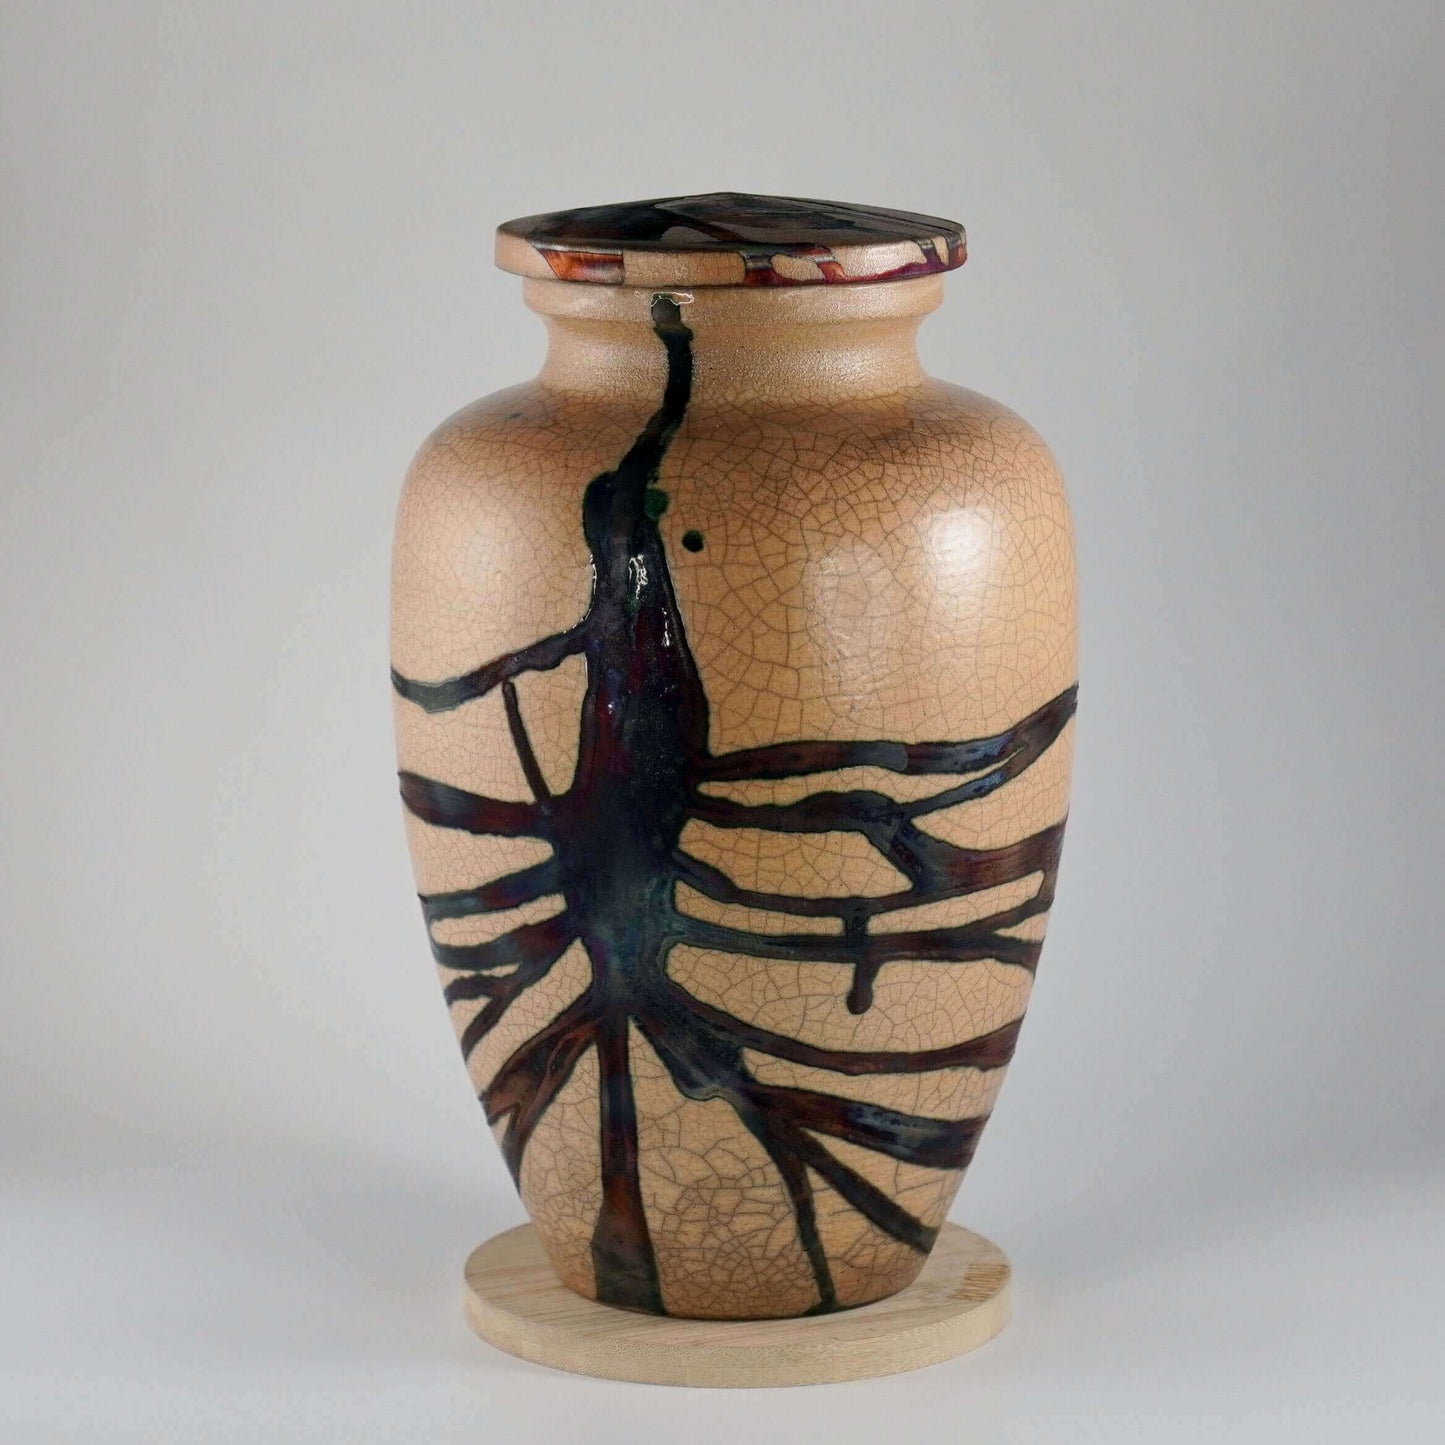 RAAQUU Omoide Ceramic Half Copper Matte Urn for Adult Remains/Ashes S/N80000130 - Raku Pottery 170 cubic inches Unique Handmade Cremation Vessel